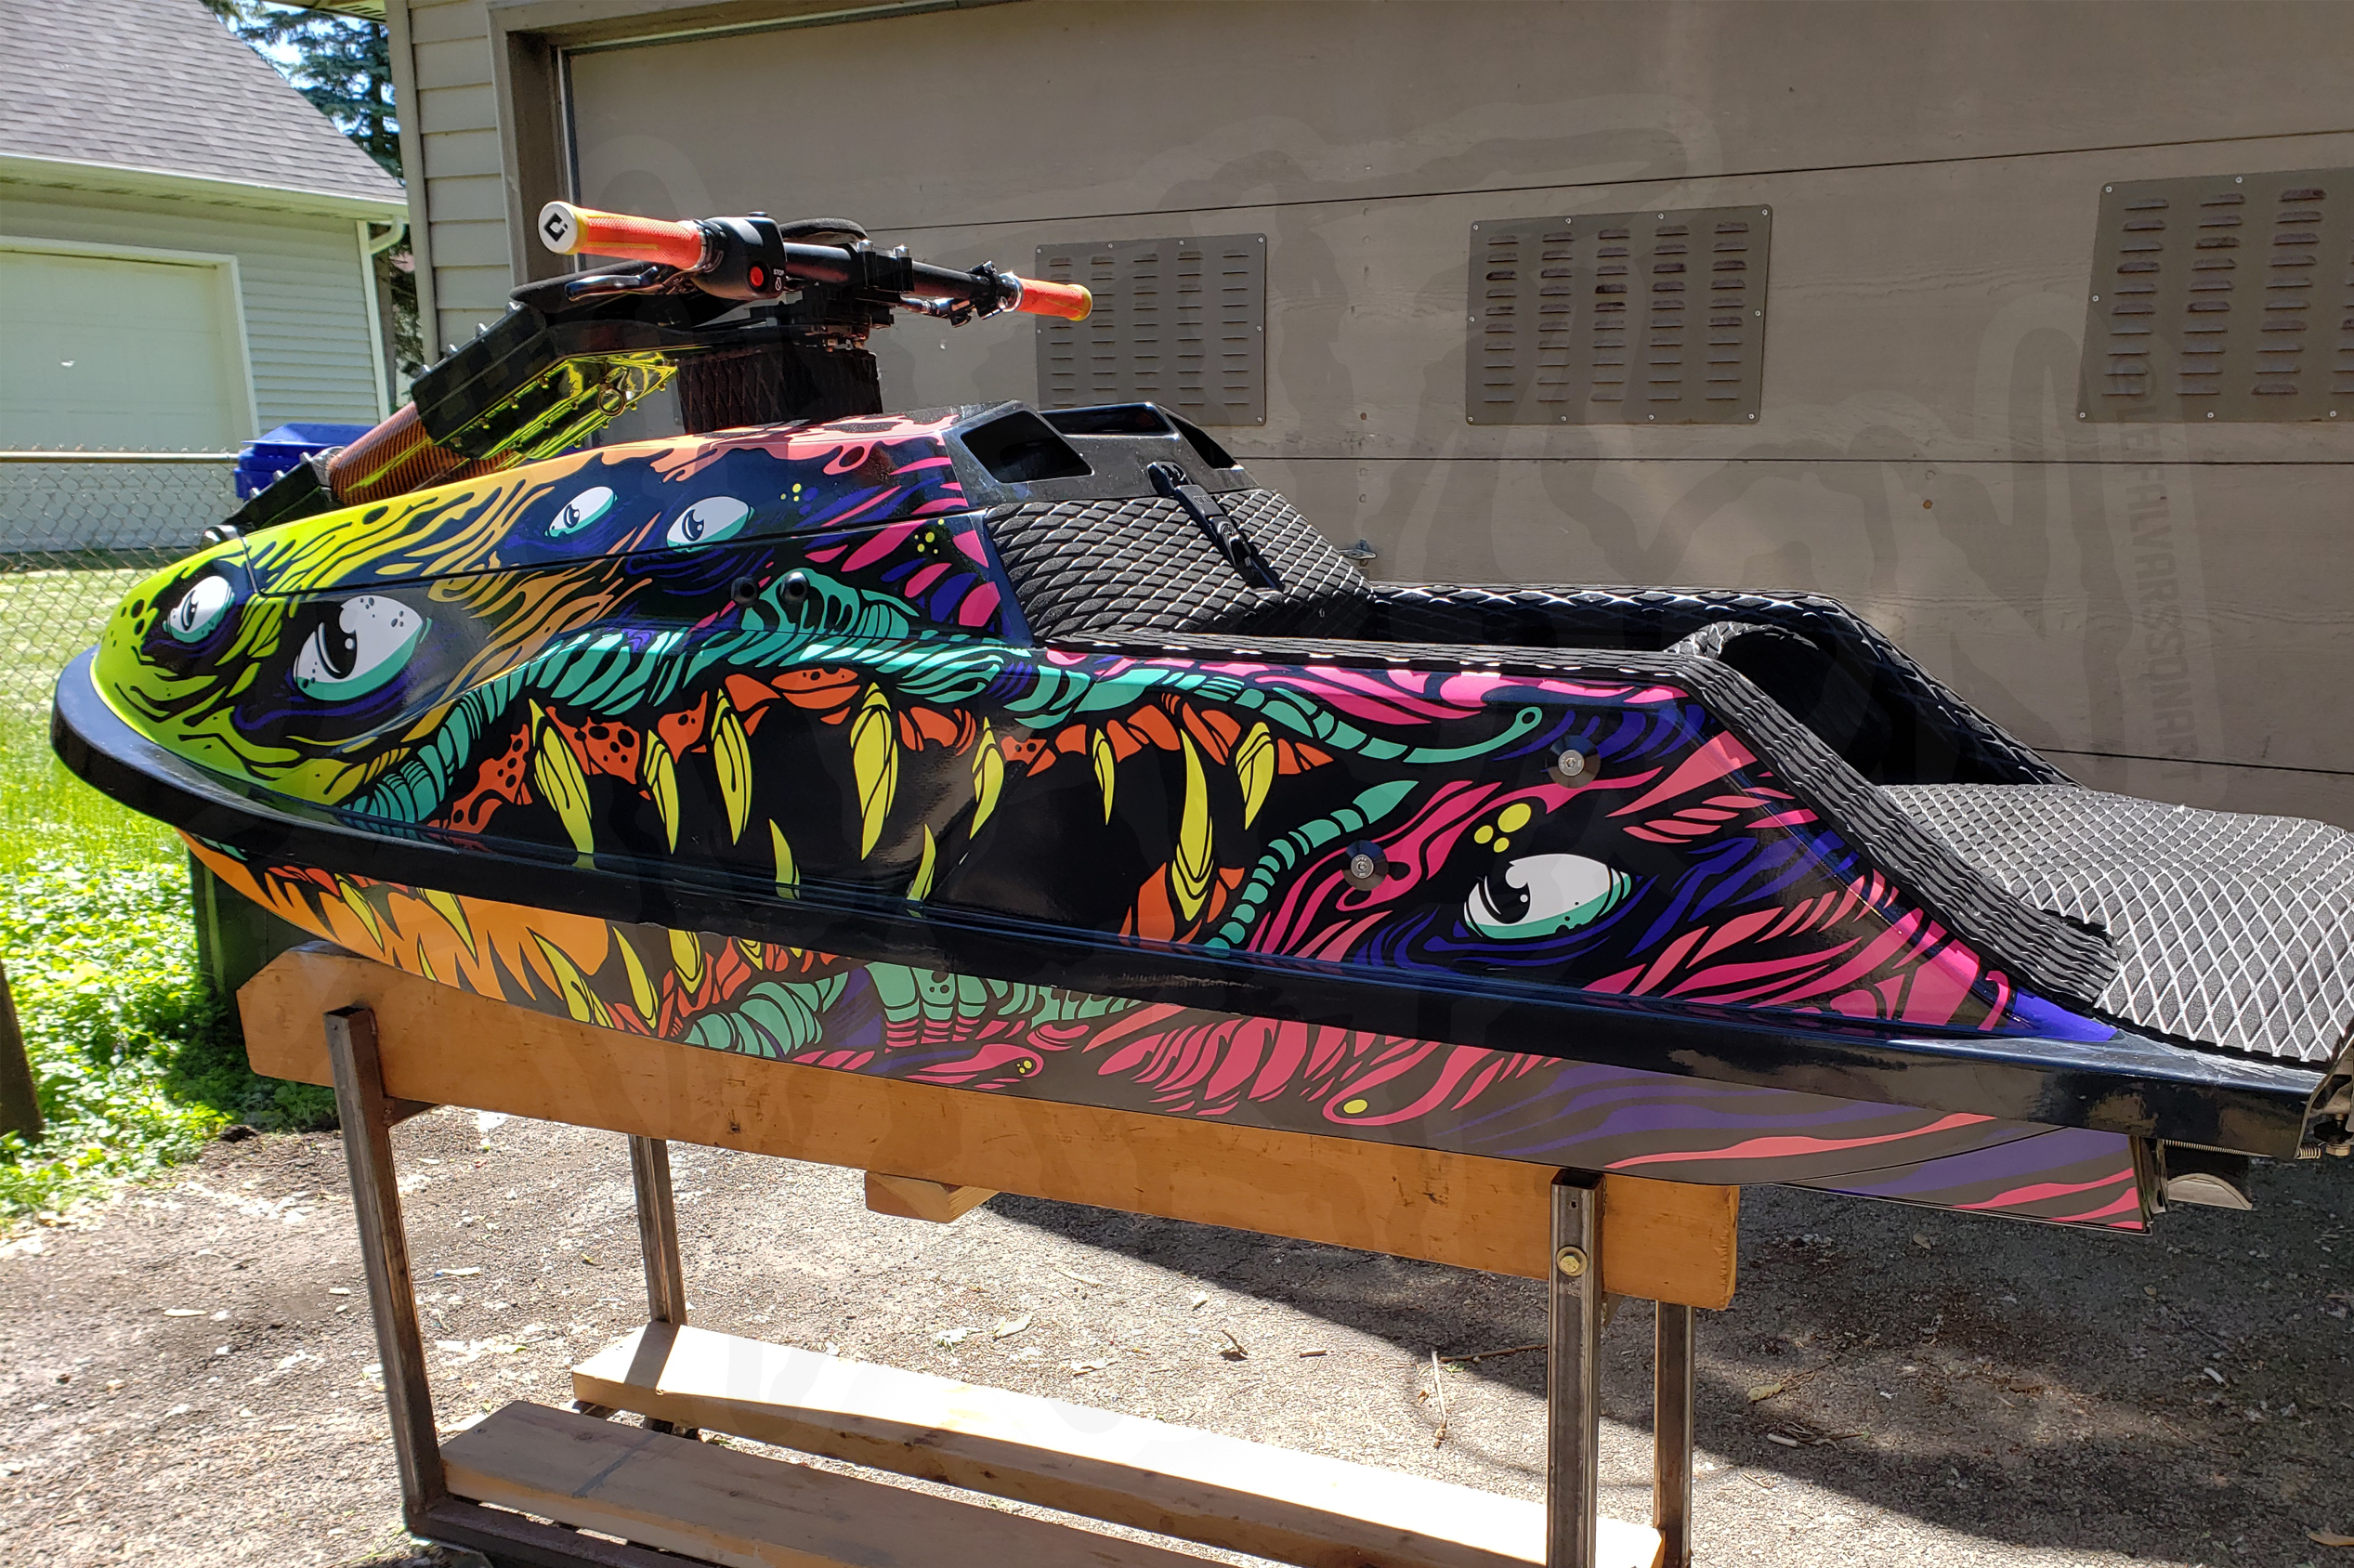 tiger craft jet ski with green purple orange colors with a sea creature graphics with sharp teeths